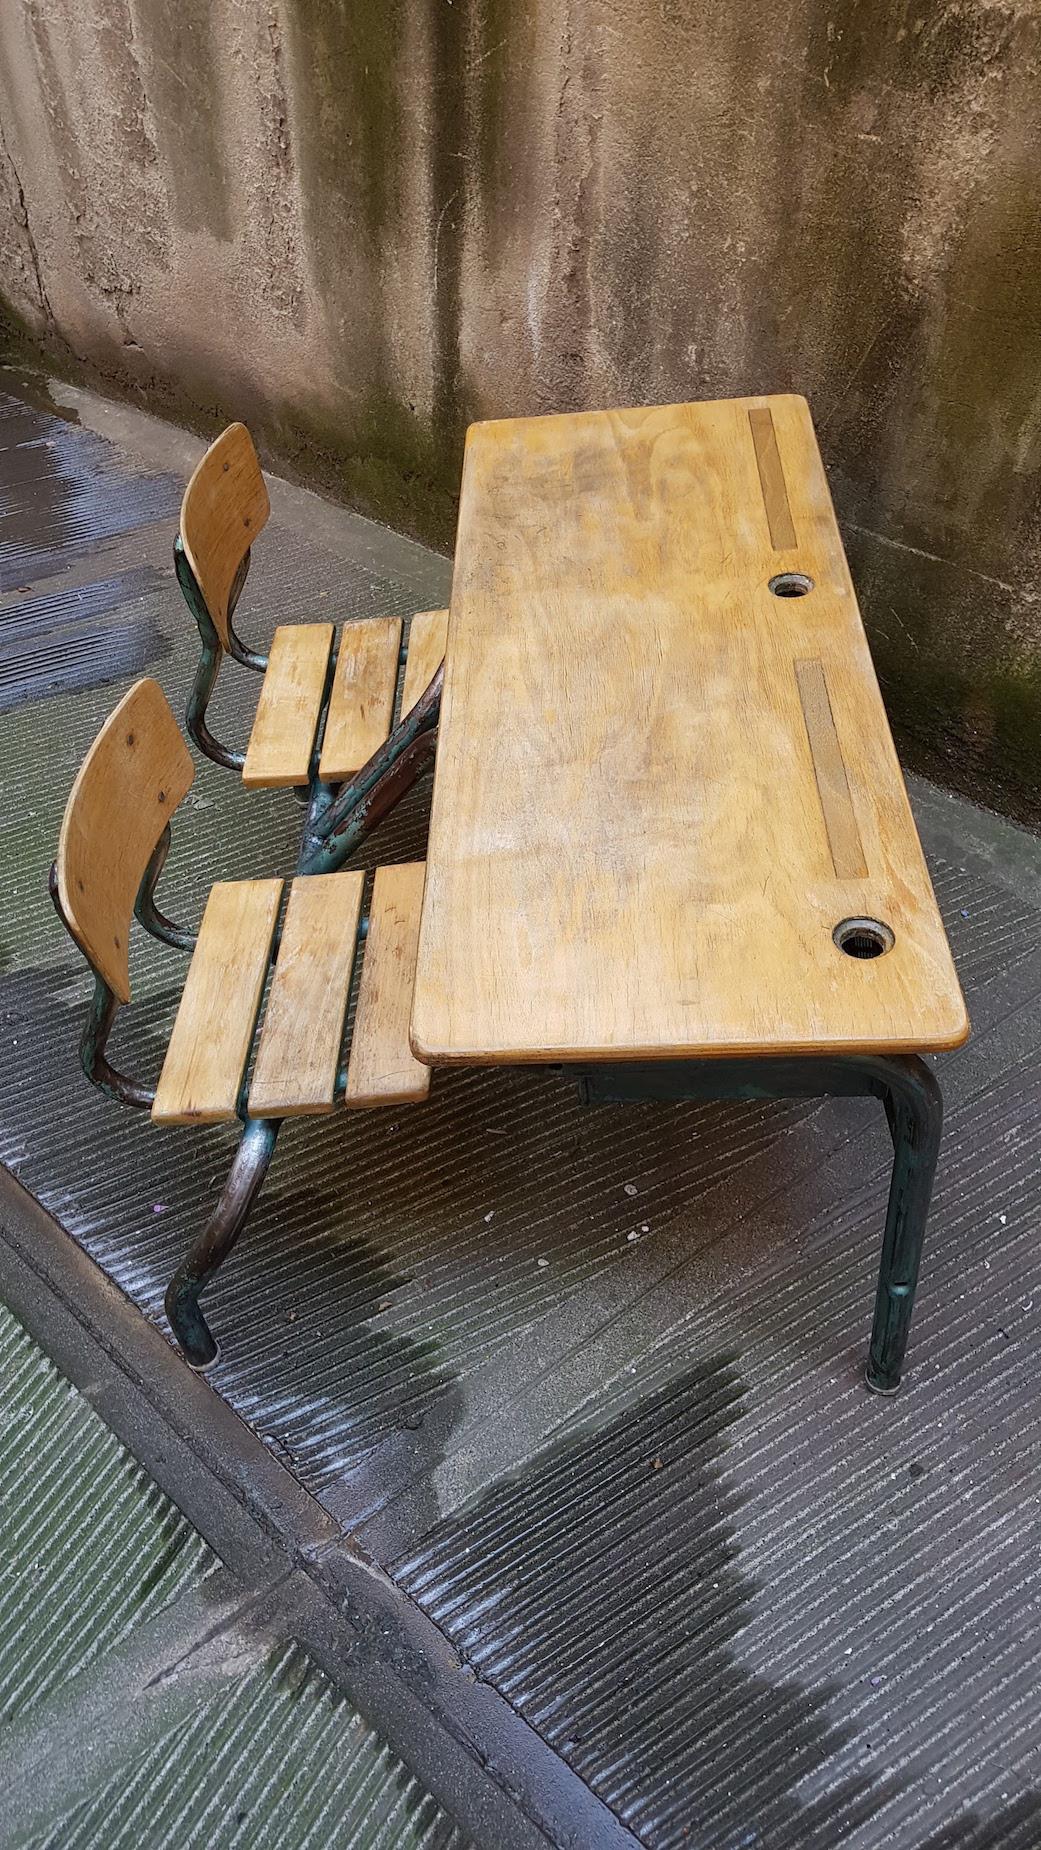 This charming double bench from the 1950s has its structure made by iron and wooden table and seats. It is in excellent condition with the original 2 inkcups and the shelves for books under the table. It could be an amazing alternative to a desk for